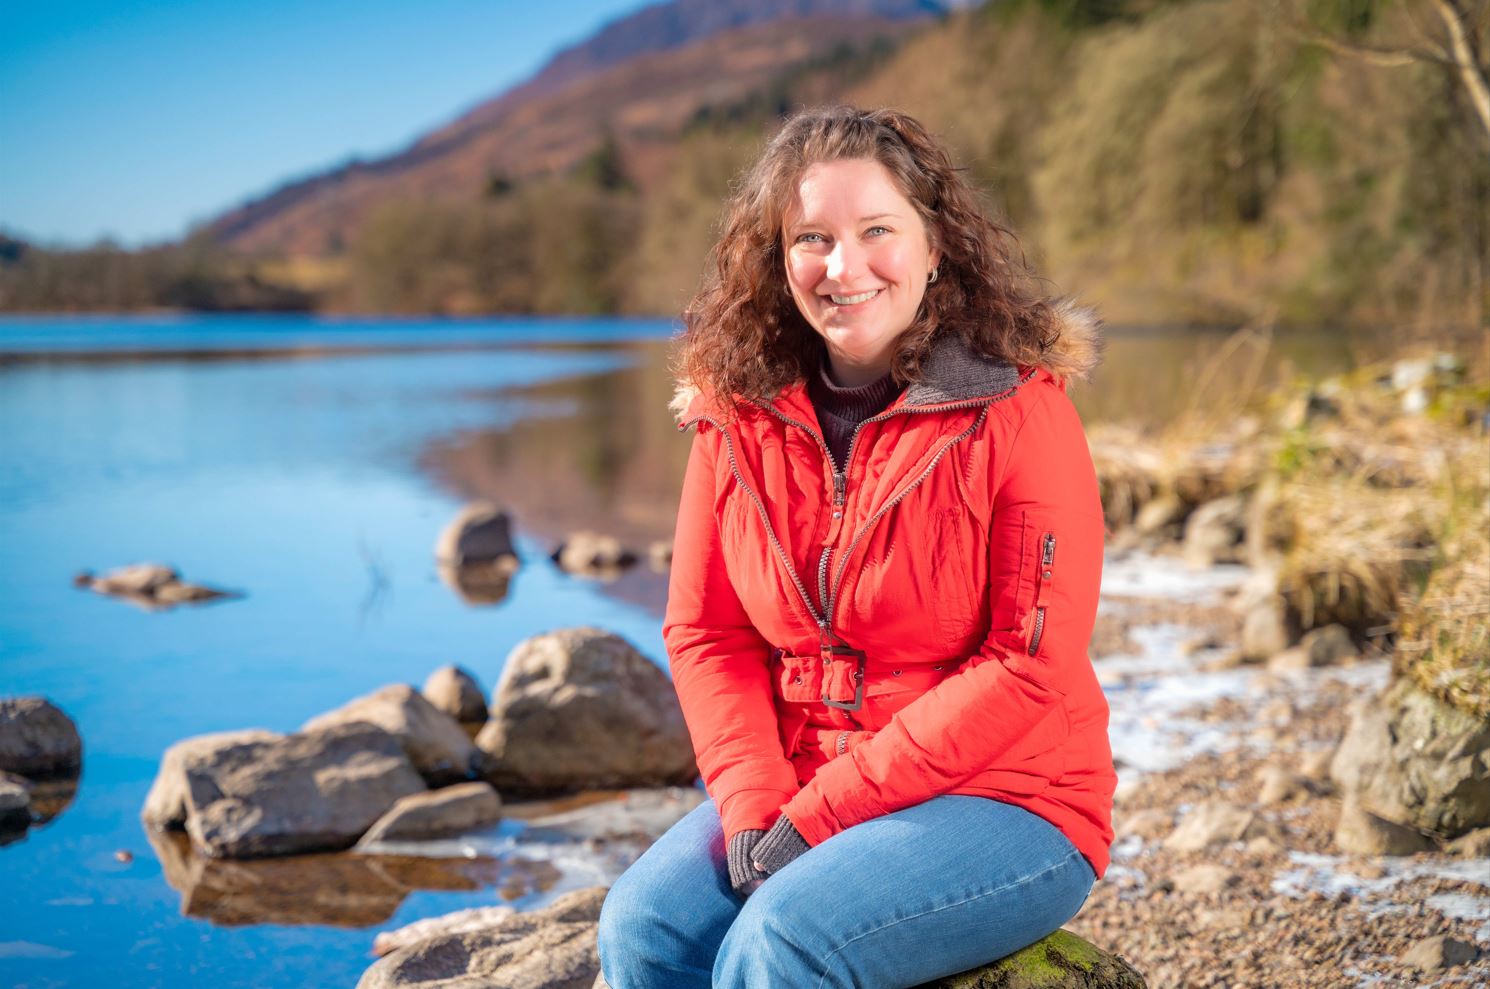 Lochaber student selected for UHI prize